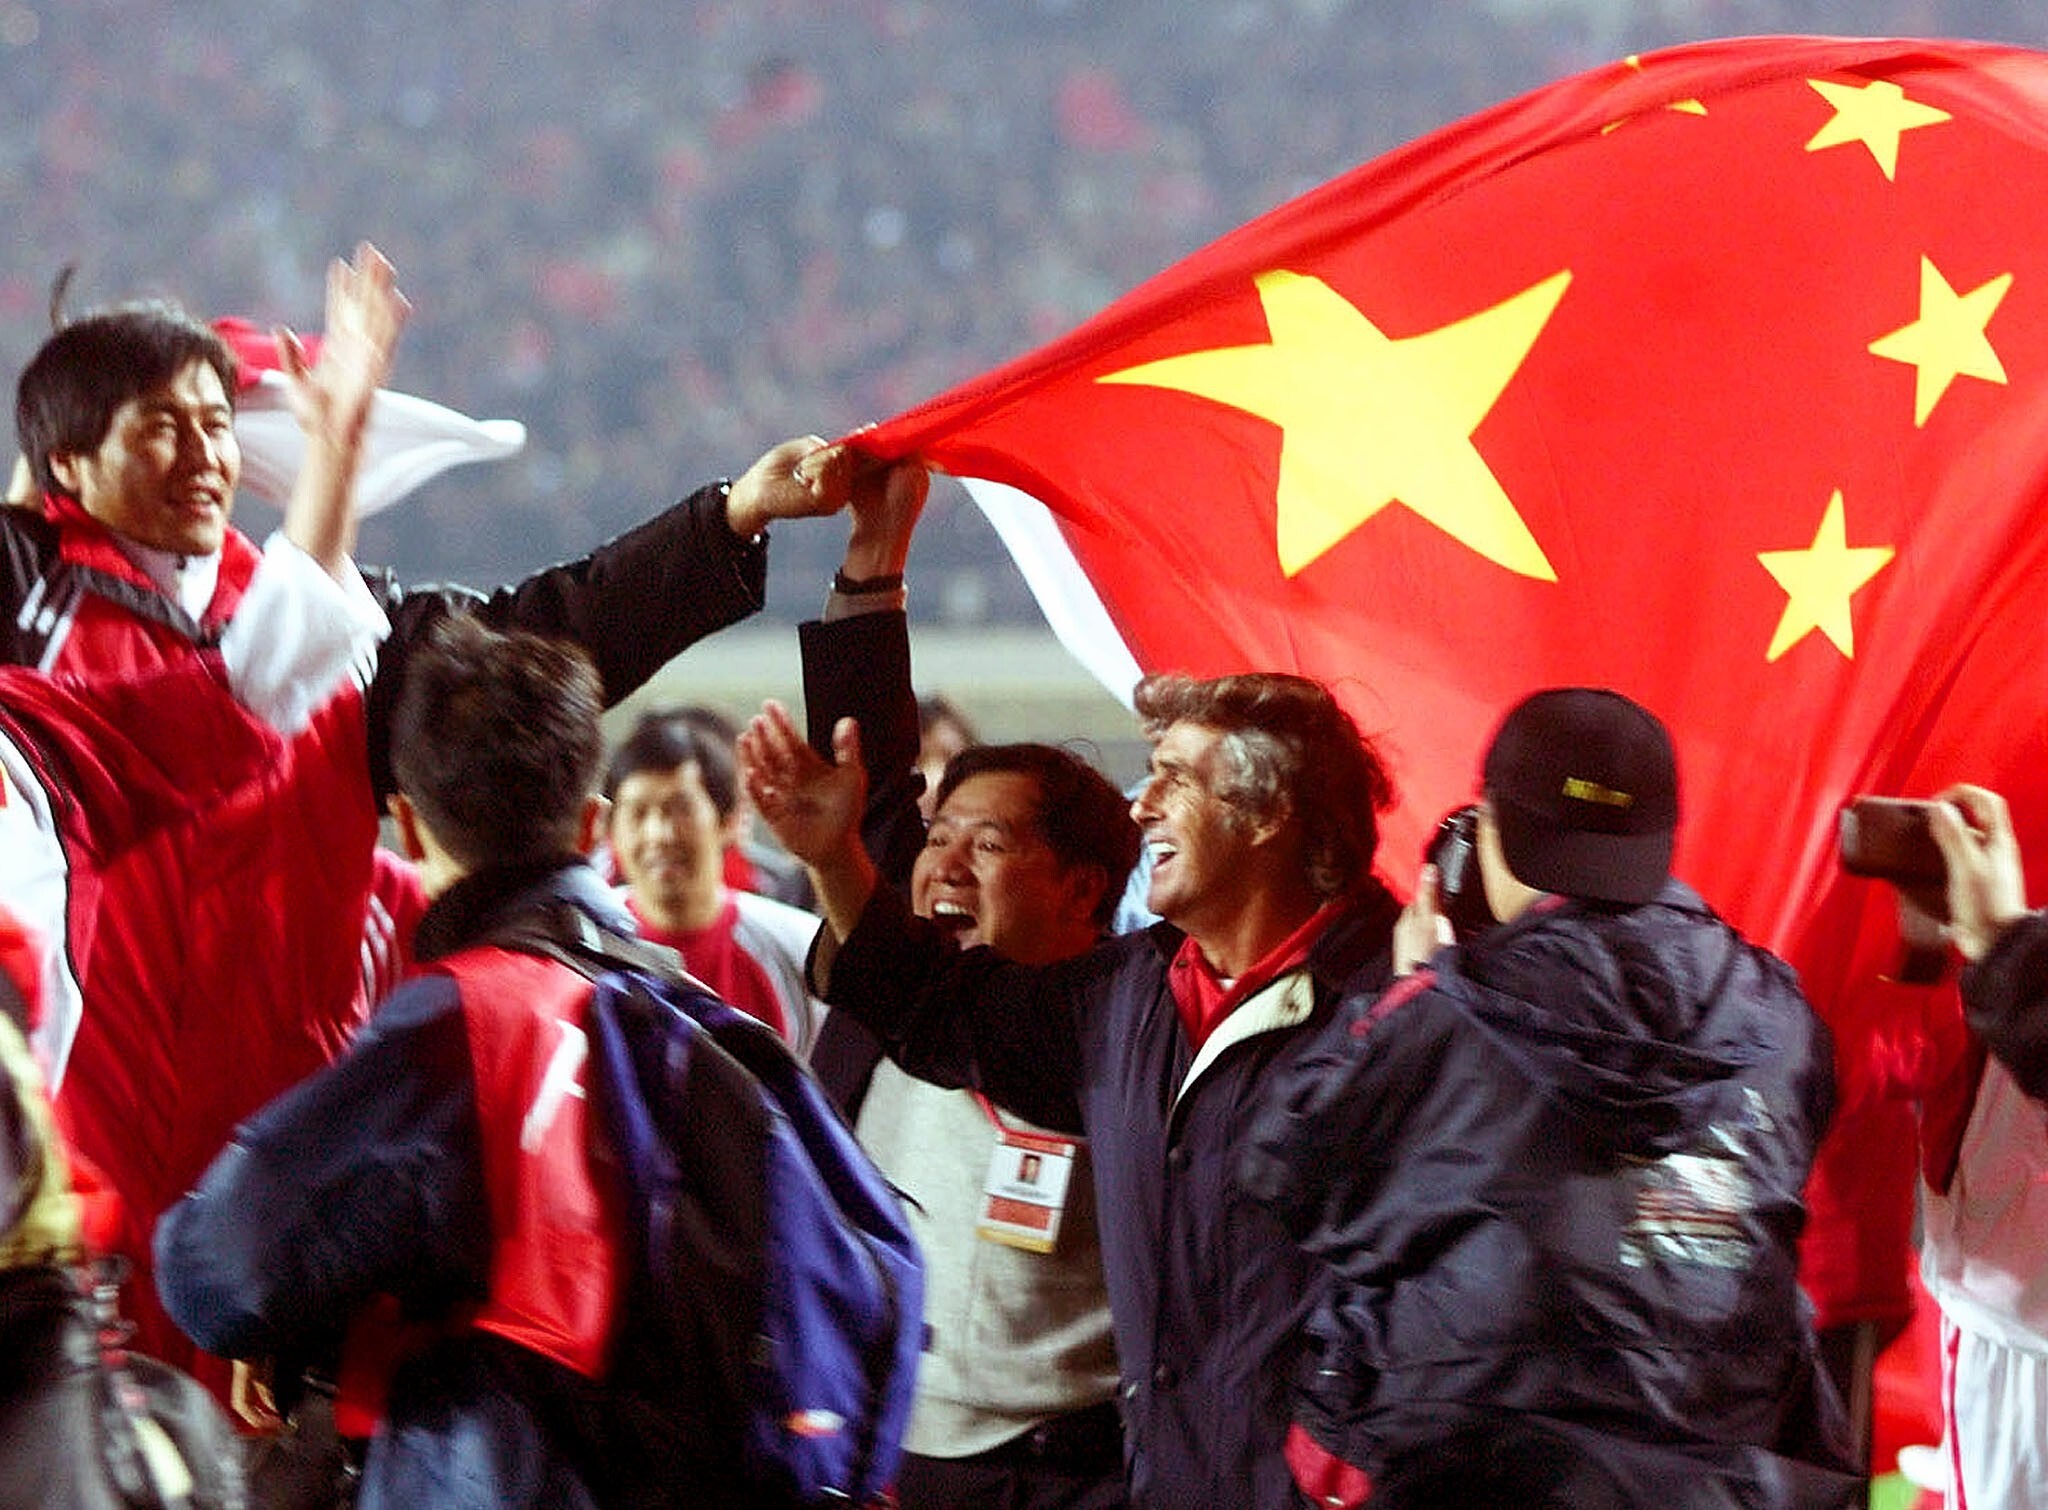 Chinese players and officials celebrate with national team coach Bora Milutinovic (centre, waving right hand) after China's 1-0 victory over Oman in Shenyang on October 7, 2001. The result secured China’s first Fifa World Cup Finals appearance. Photo: Reuters